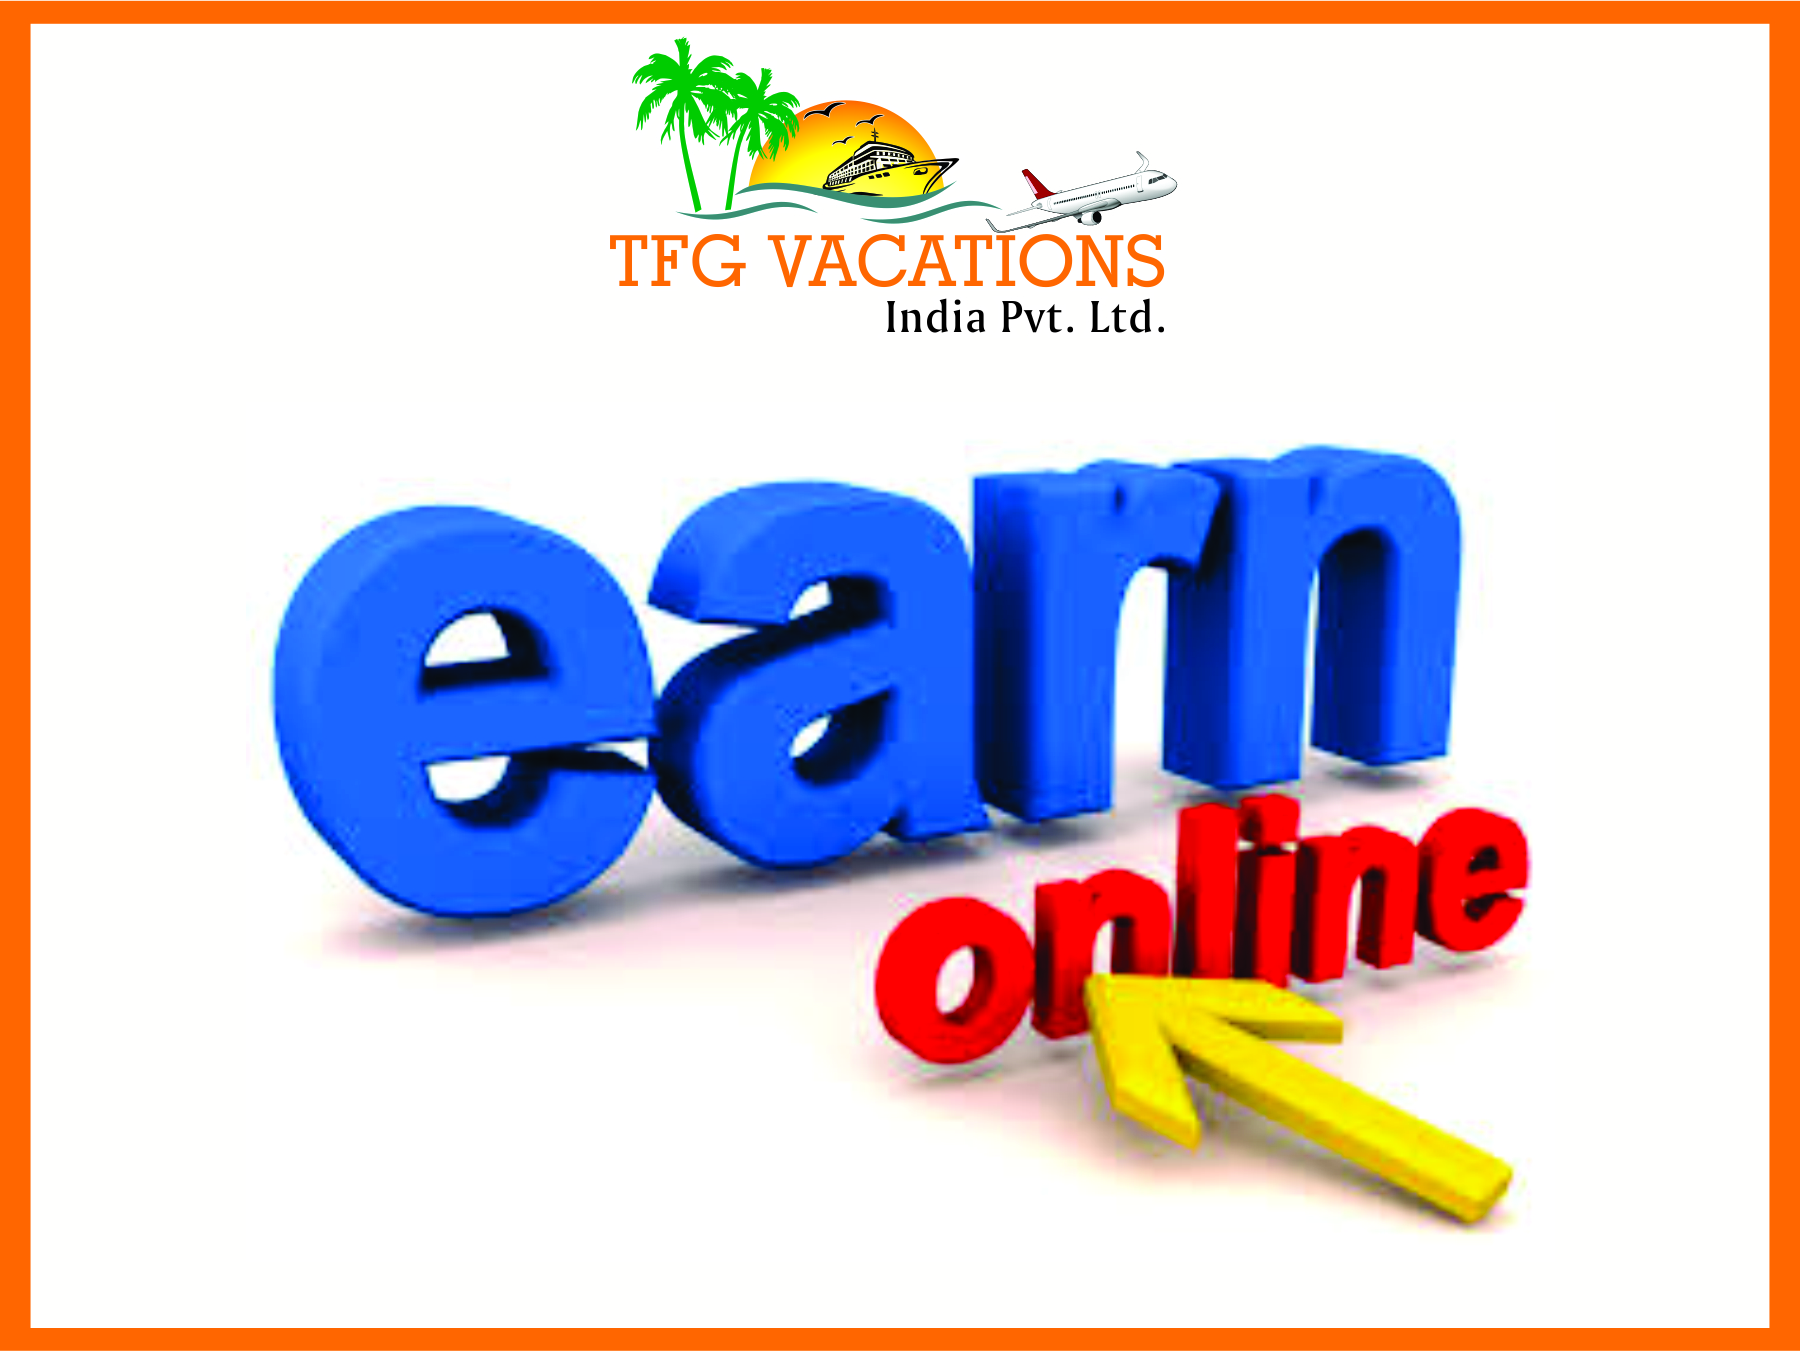 SPEND 2-3 HOURS AND EARN A HUGE INCOME UPTO 7000 PER WEEK,Diu,Jobs,Bpo & Telecaller